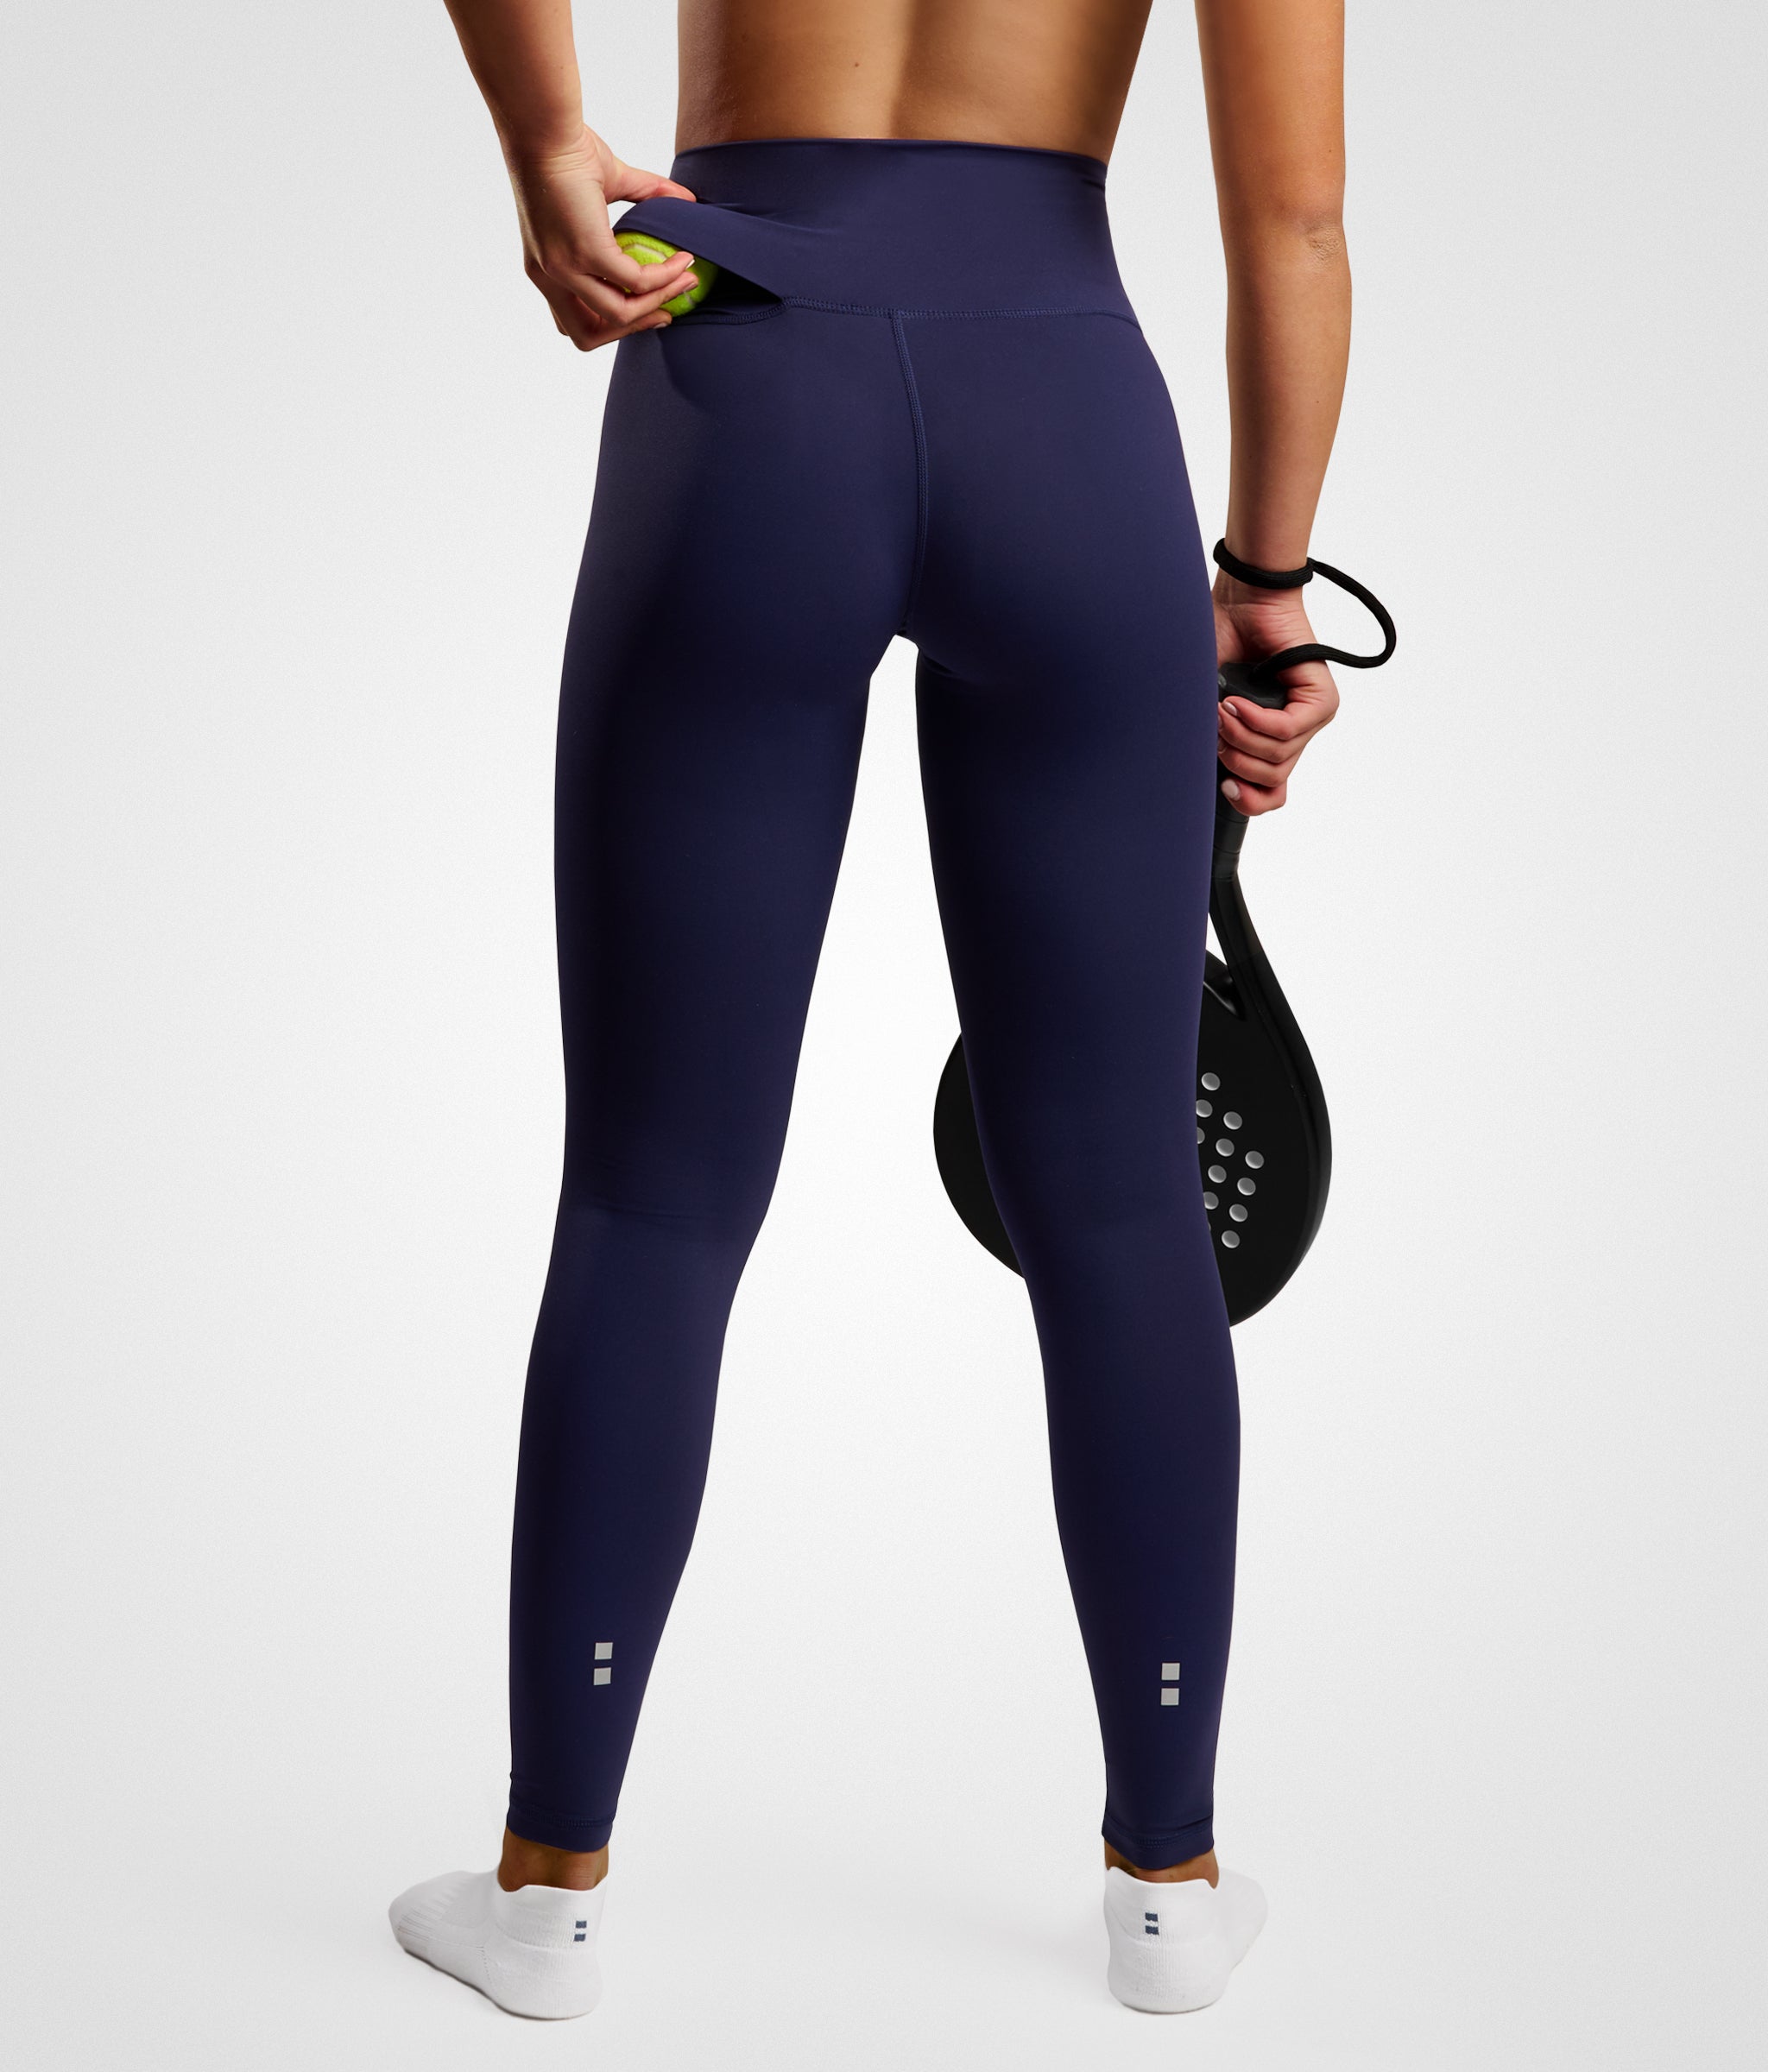 best leggings for tennis padel nordicdots navy blue nordicdots.com women outfit